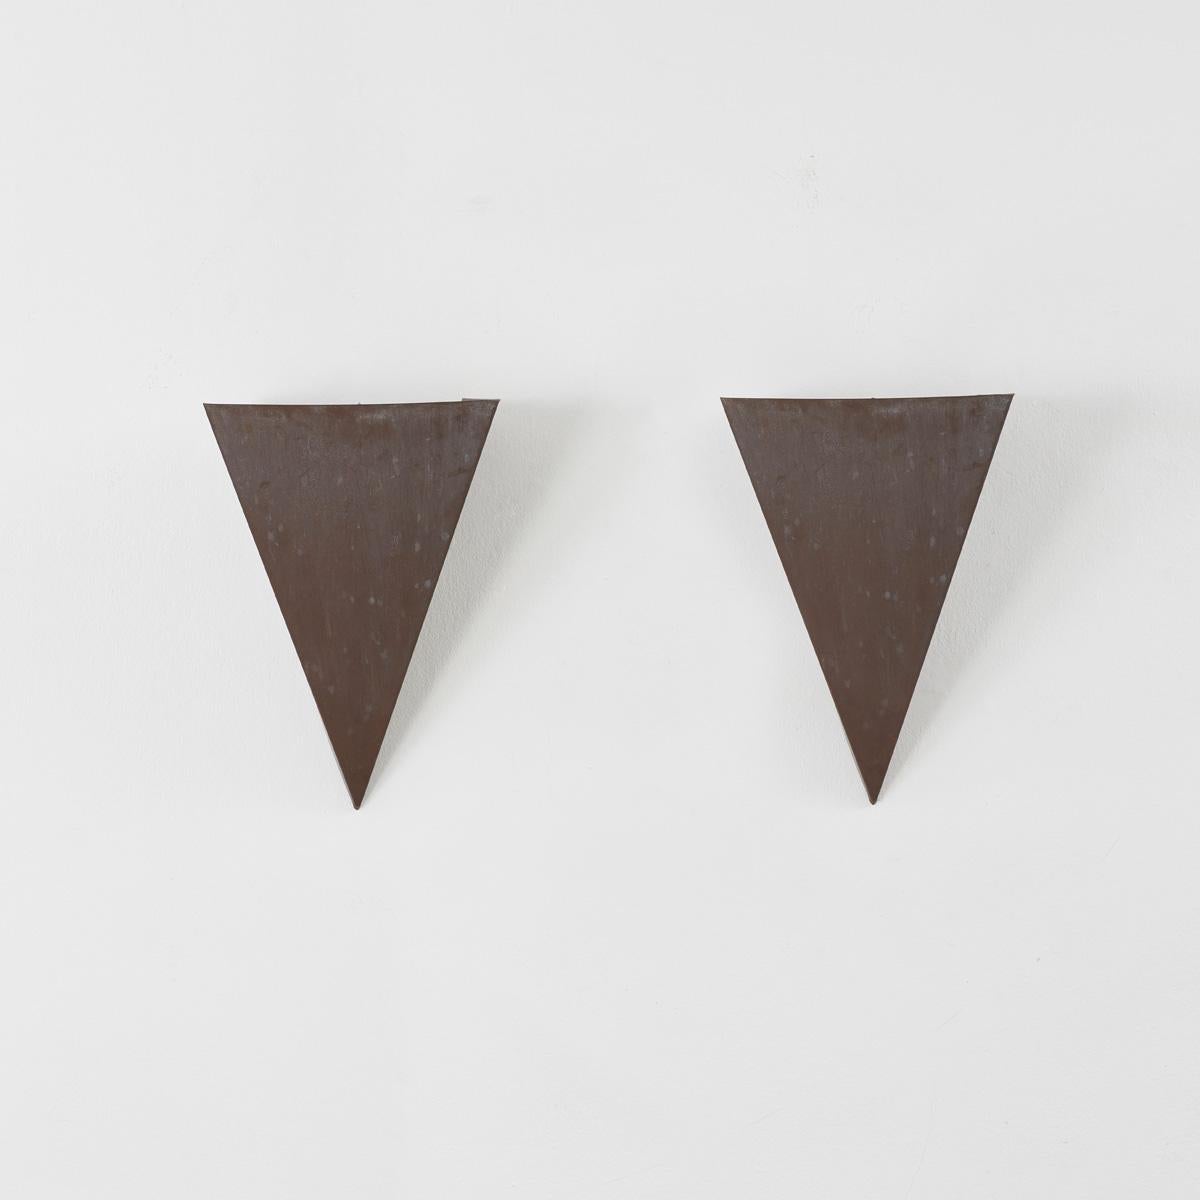 A pair of angular steel wall sconces, made by a metalworker from a sheet of steel bent at harsh angles to create a triangular shape. In turn this silhouette casts dynamic shapes, guiding the light and shadows across the wall.